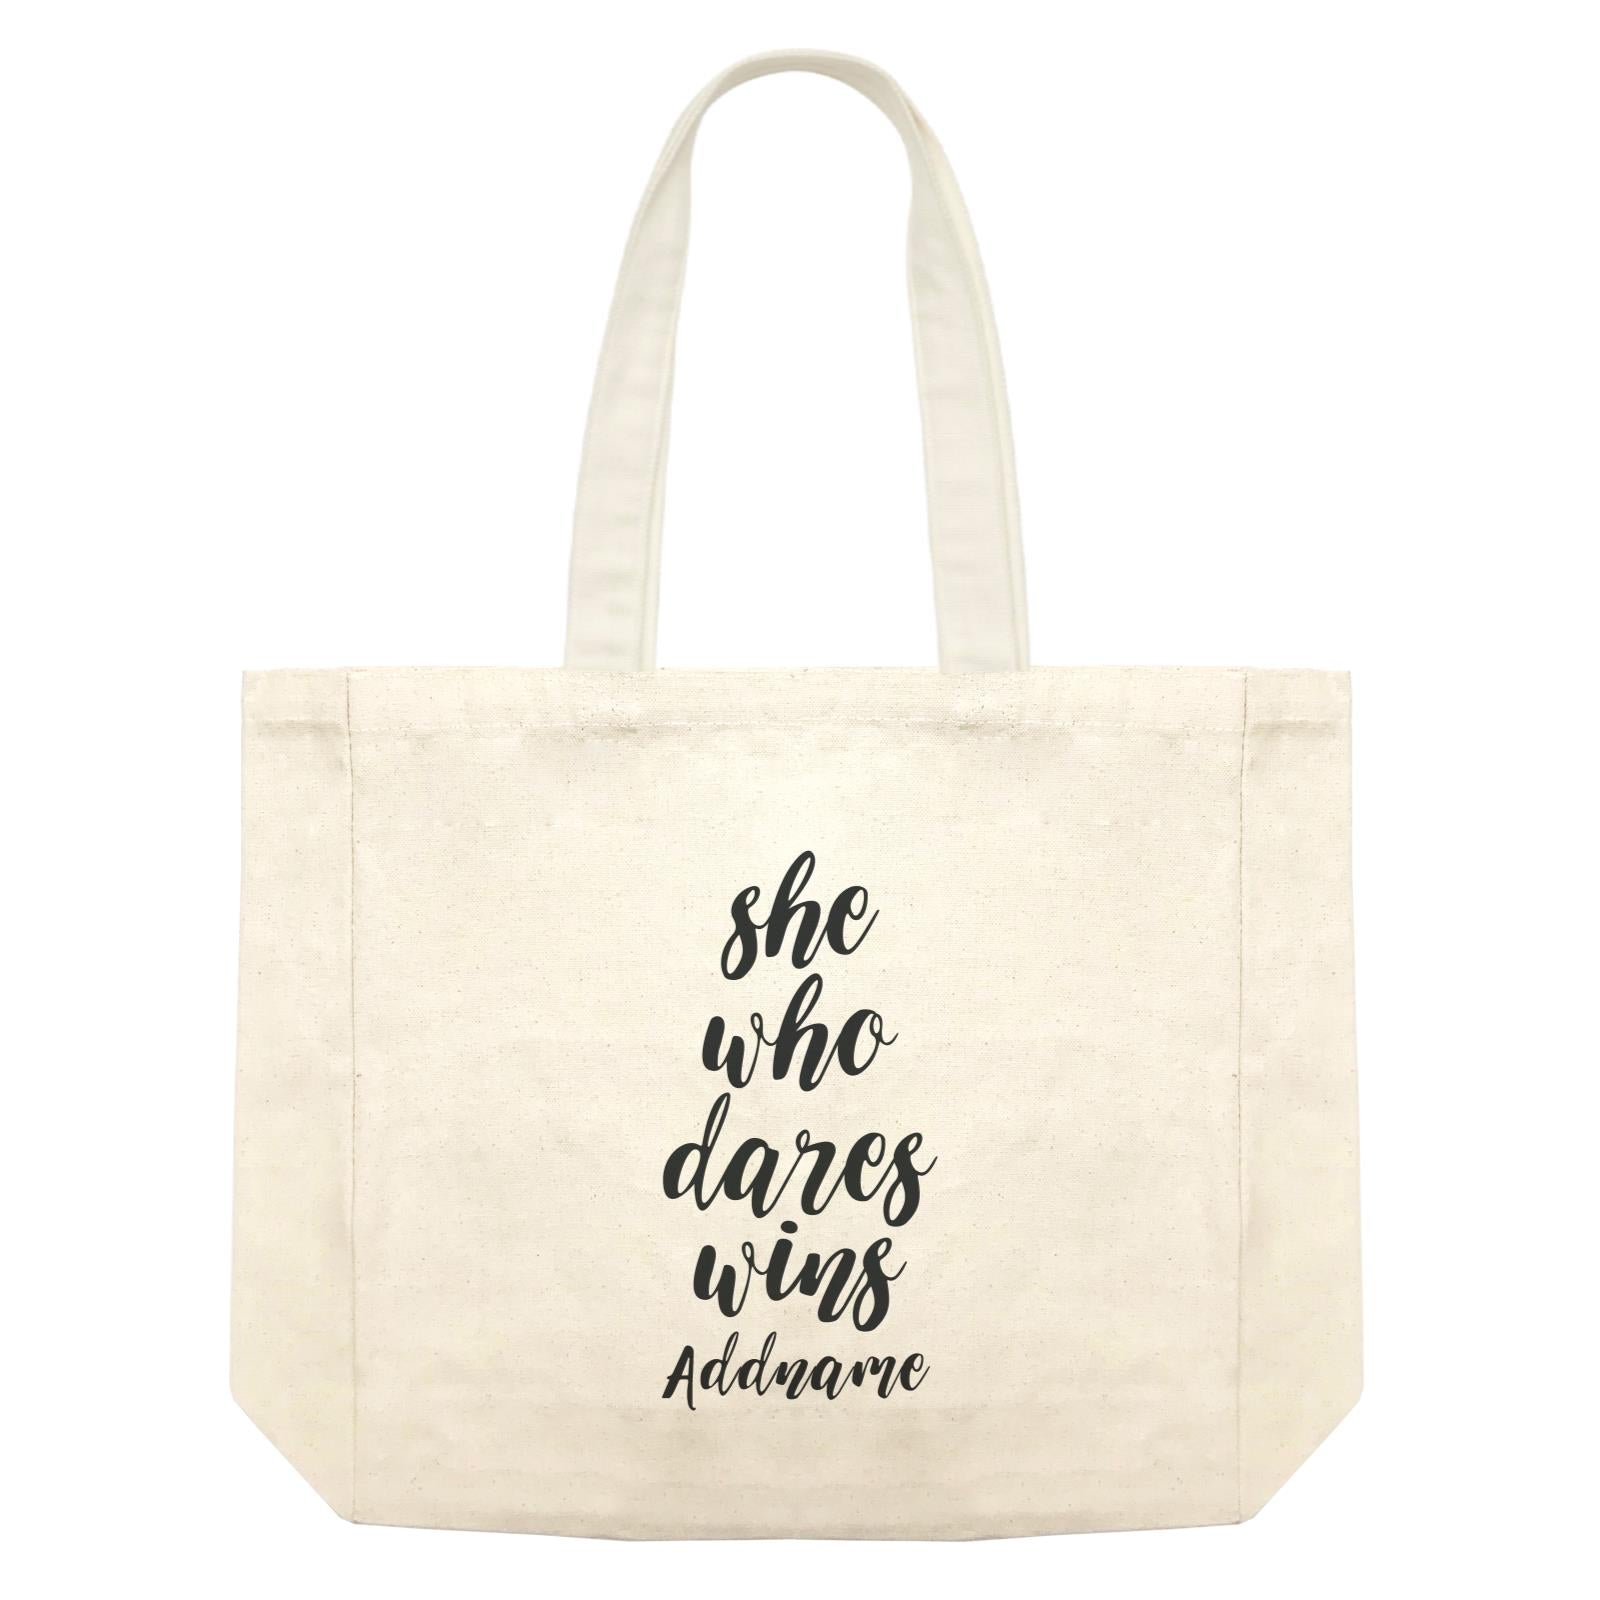 Girl Boss Quotes She Who Dares Wins Addname Shopping Bag